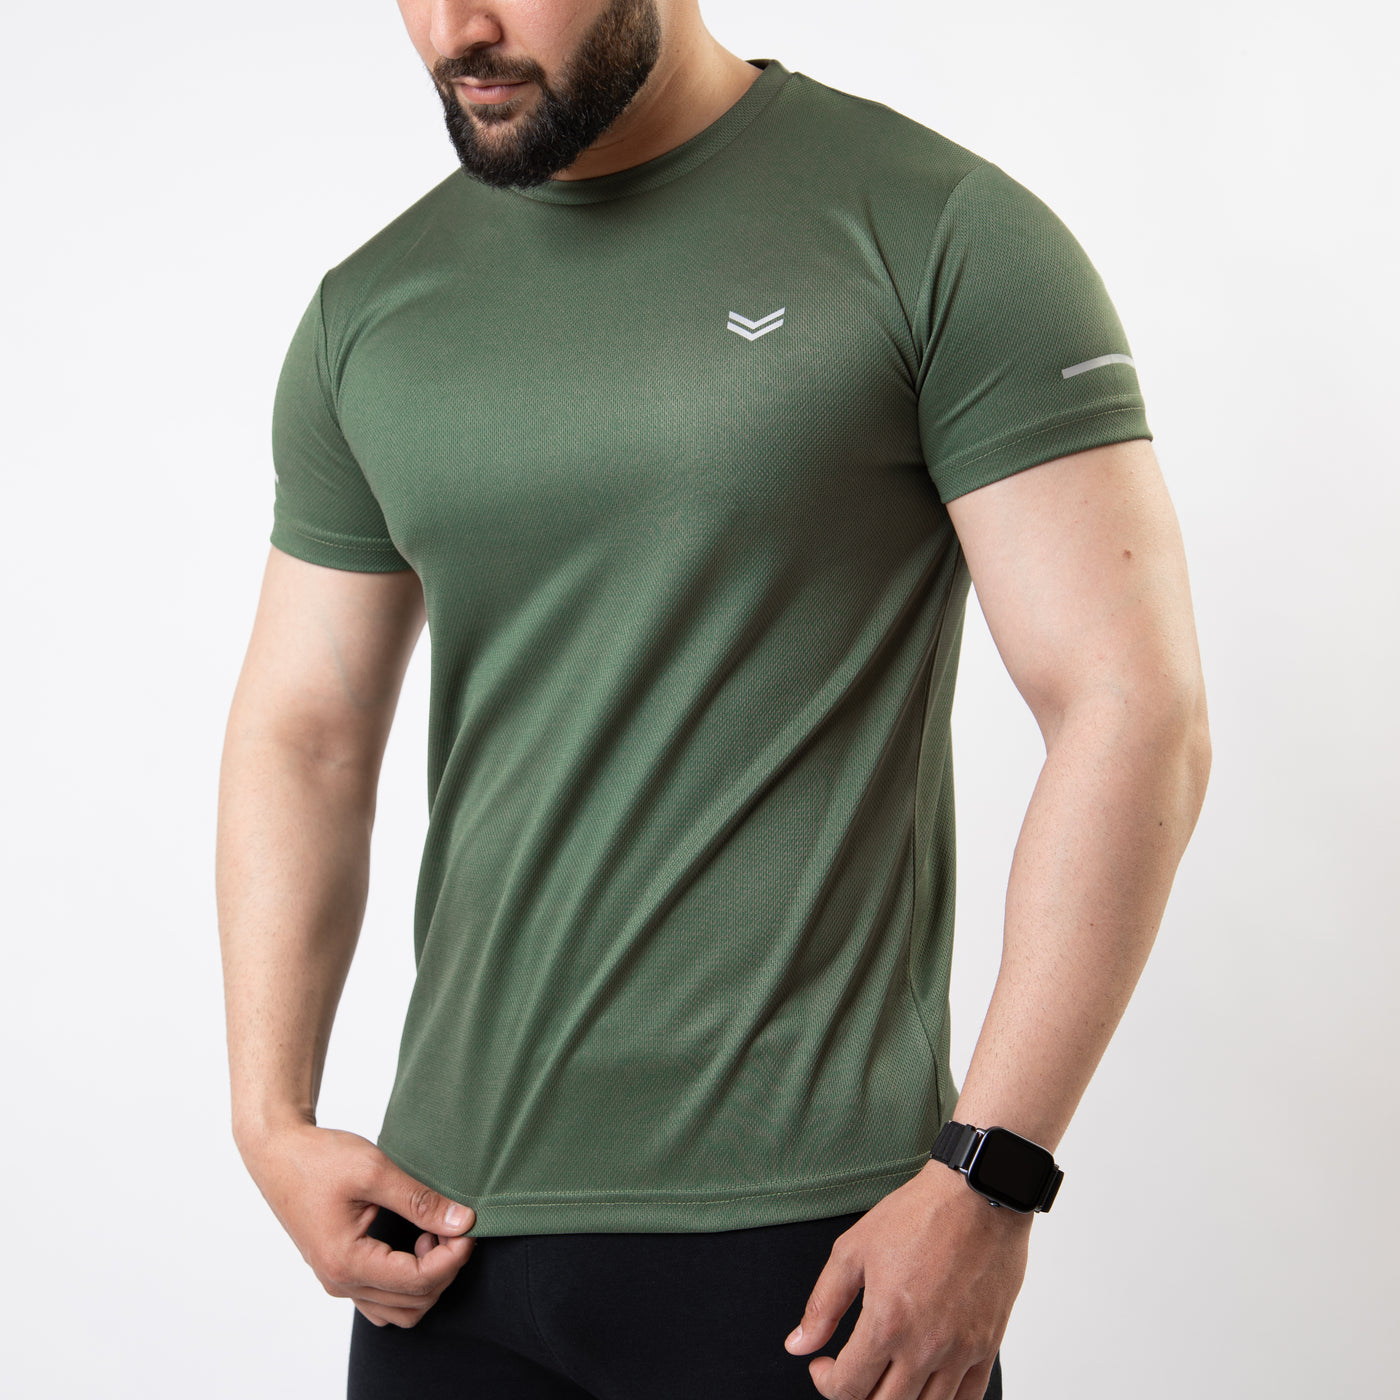 Olive Mesh Quick Dry T-Shirt With Reflective Detailing